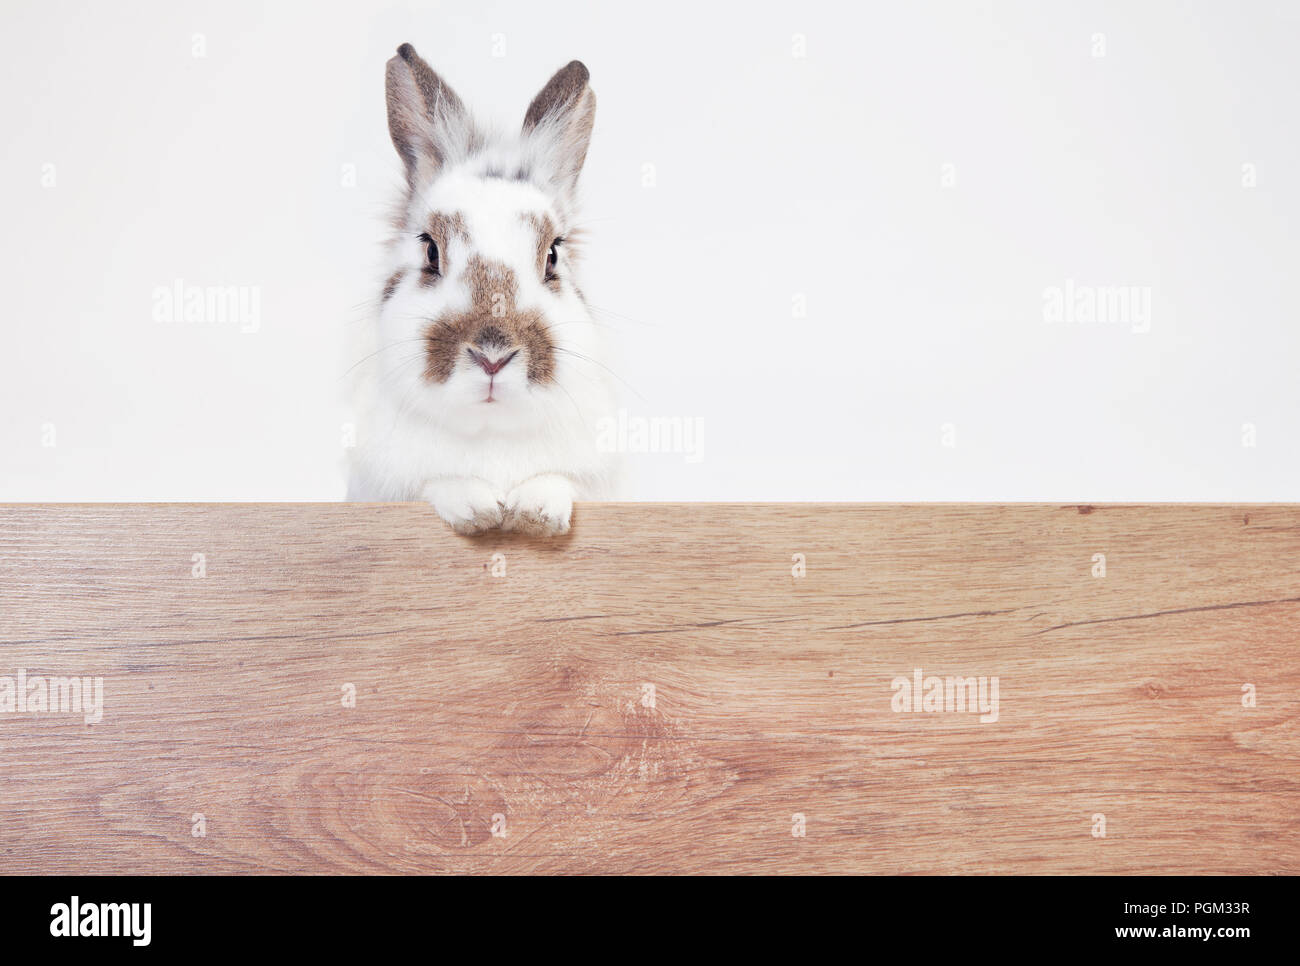 a white-brown rabbit looks into the camera over a wooden board. Background white Stock Photo